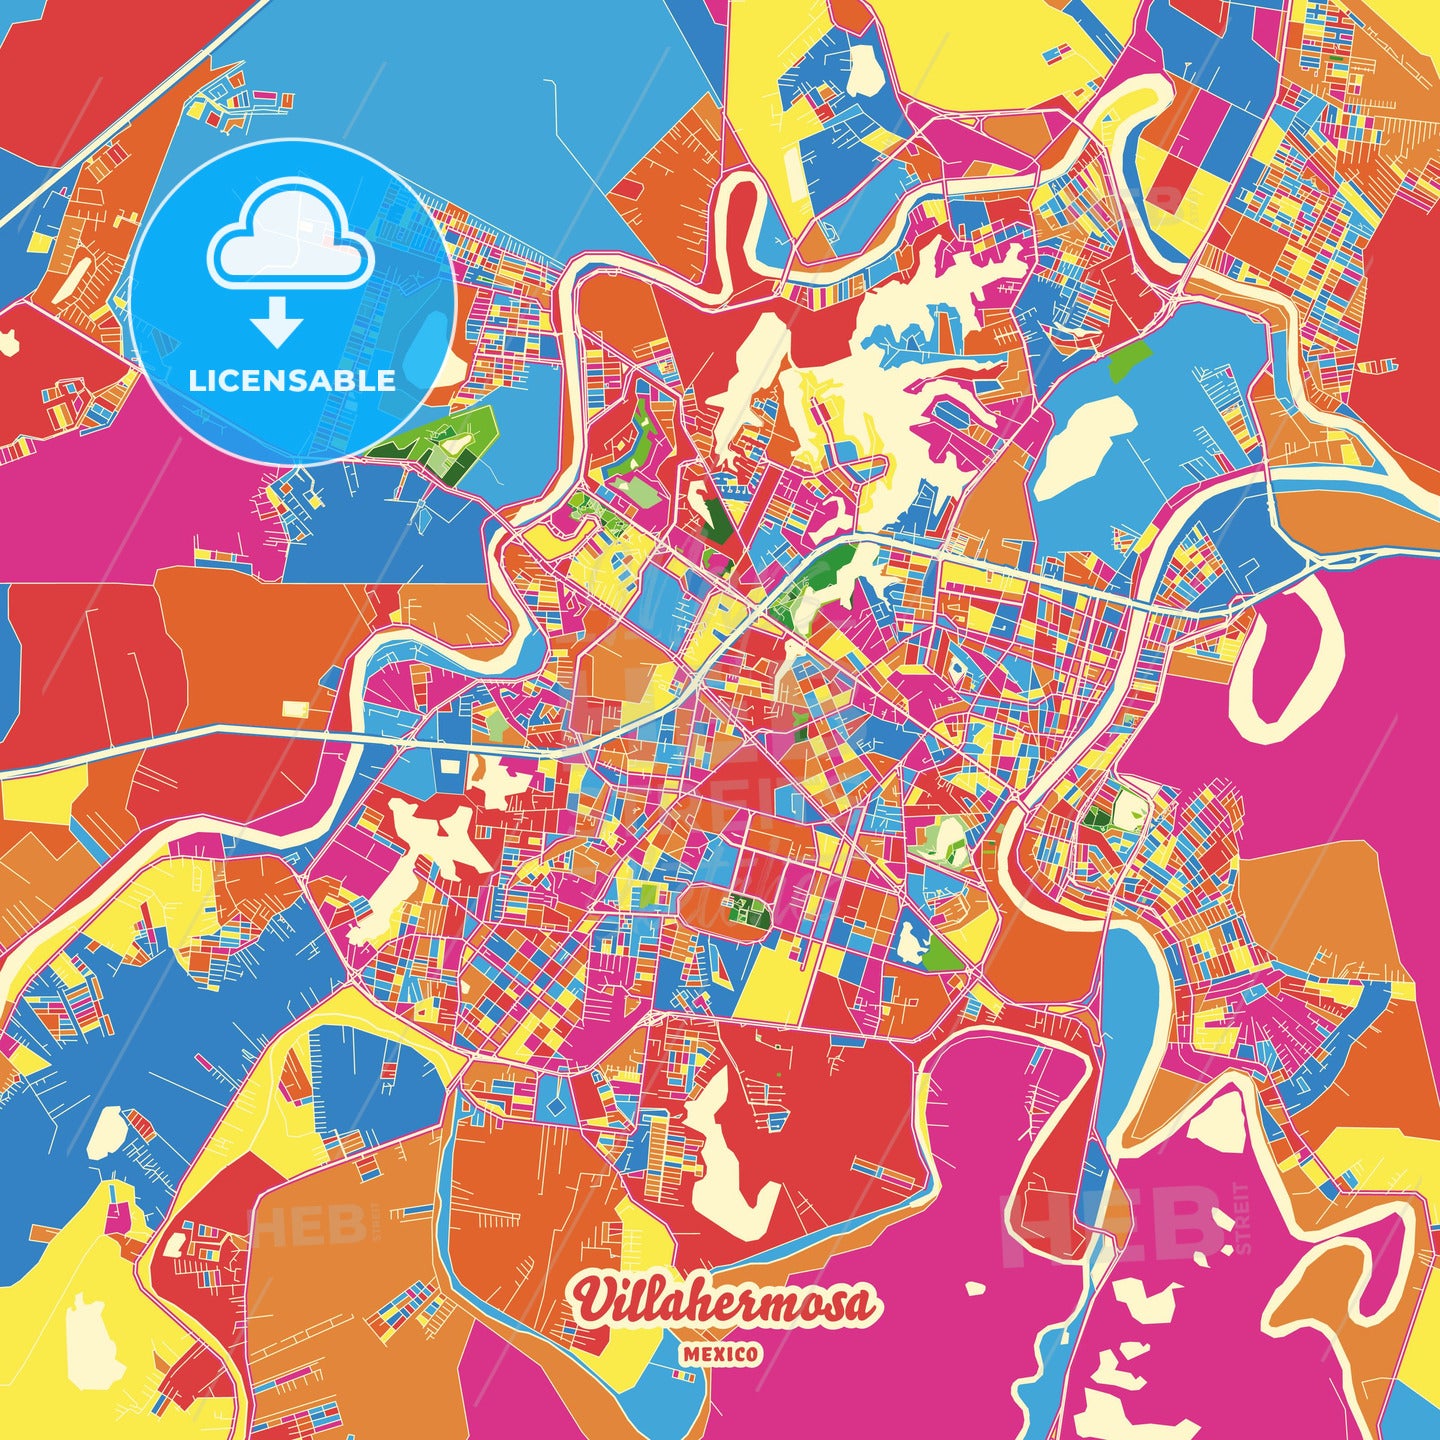 Villahermosa, Mexico Crazy Colorful Street Map Poster Template - HEBSTREITS Sketches